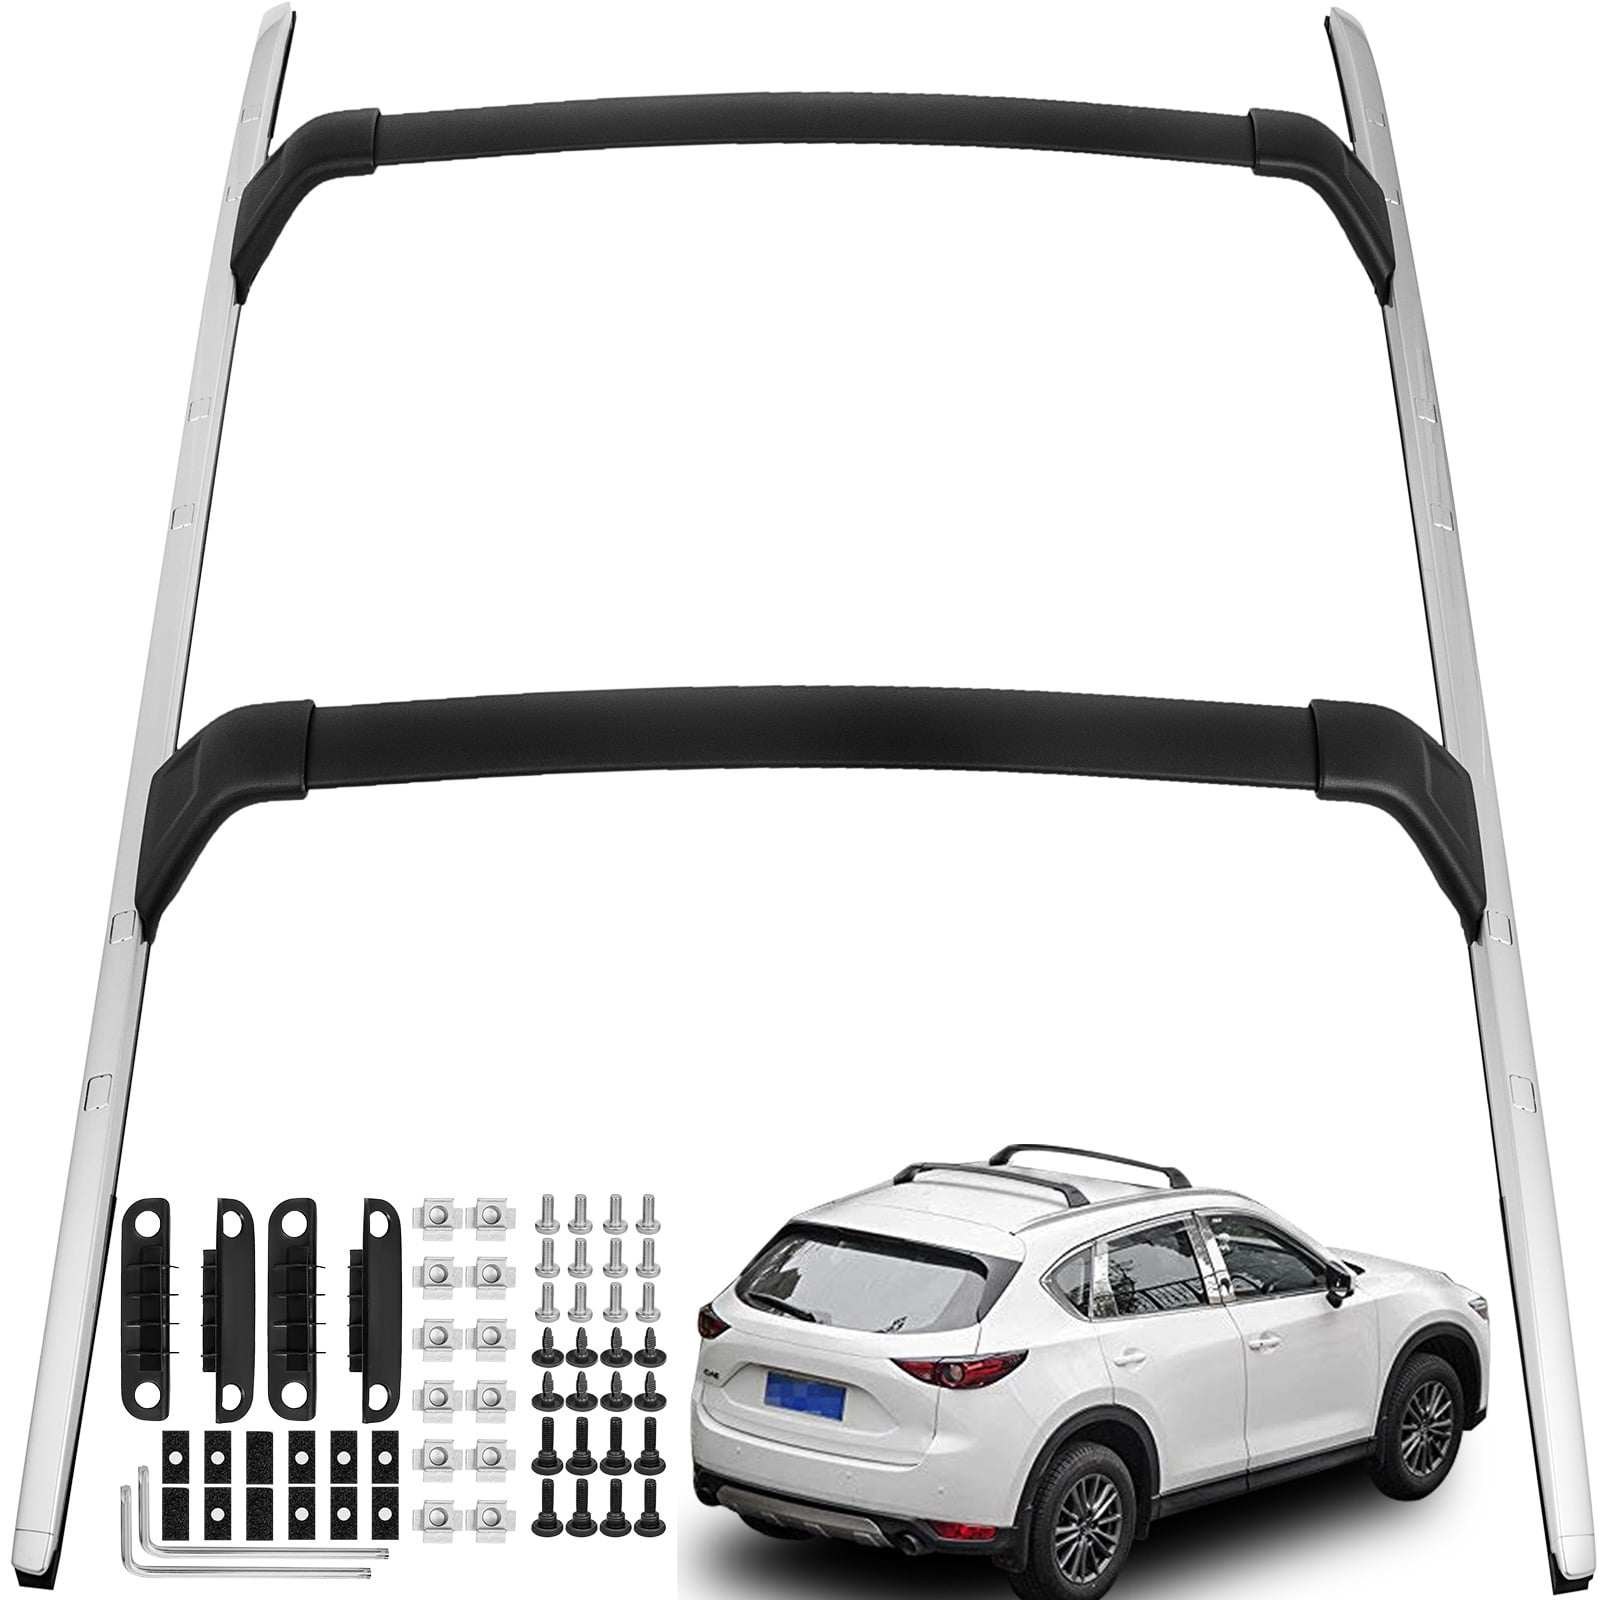 MOSTPLUS Roof Rack Cross Bar Rail Compatible with 2017 2018 Mazda CX5 CX-5 Cargo Racks Rooftop Luggage Canoe Kayak Carrier Rack